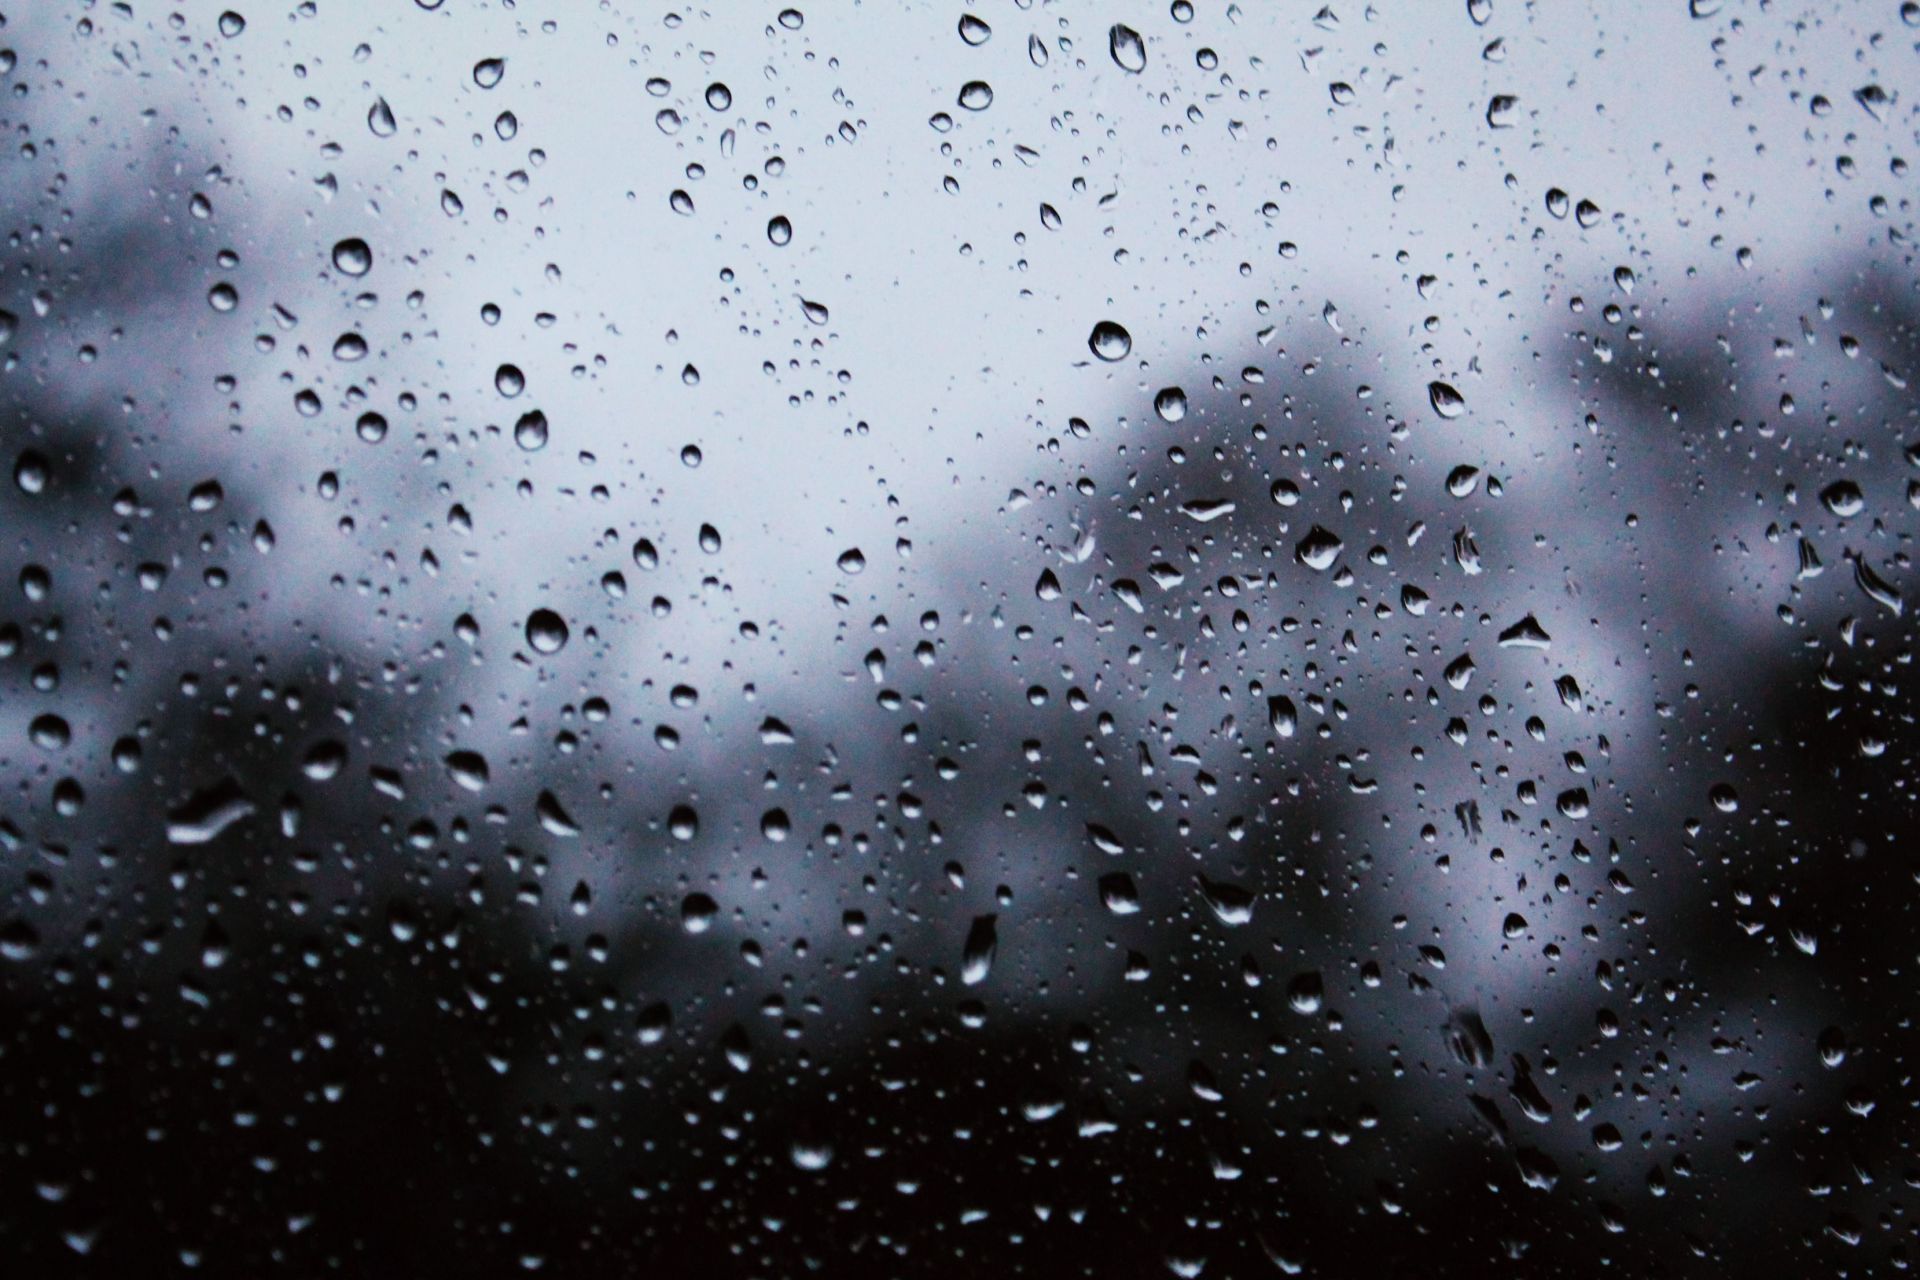 An average raindrop falls at the speed of roughly 7 miles an hour.